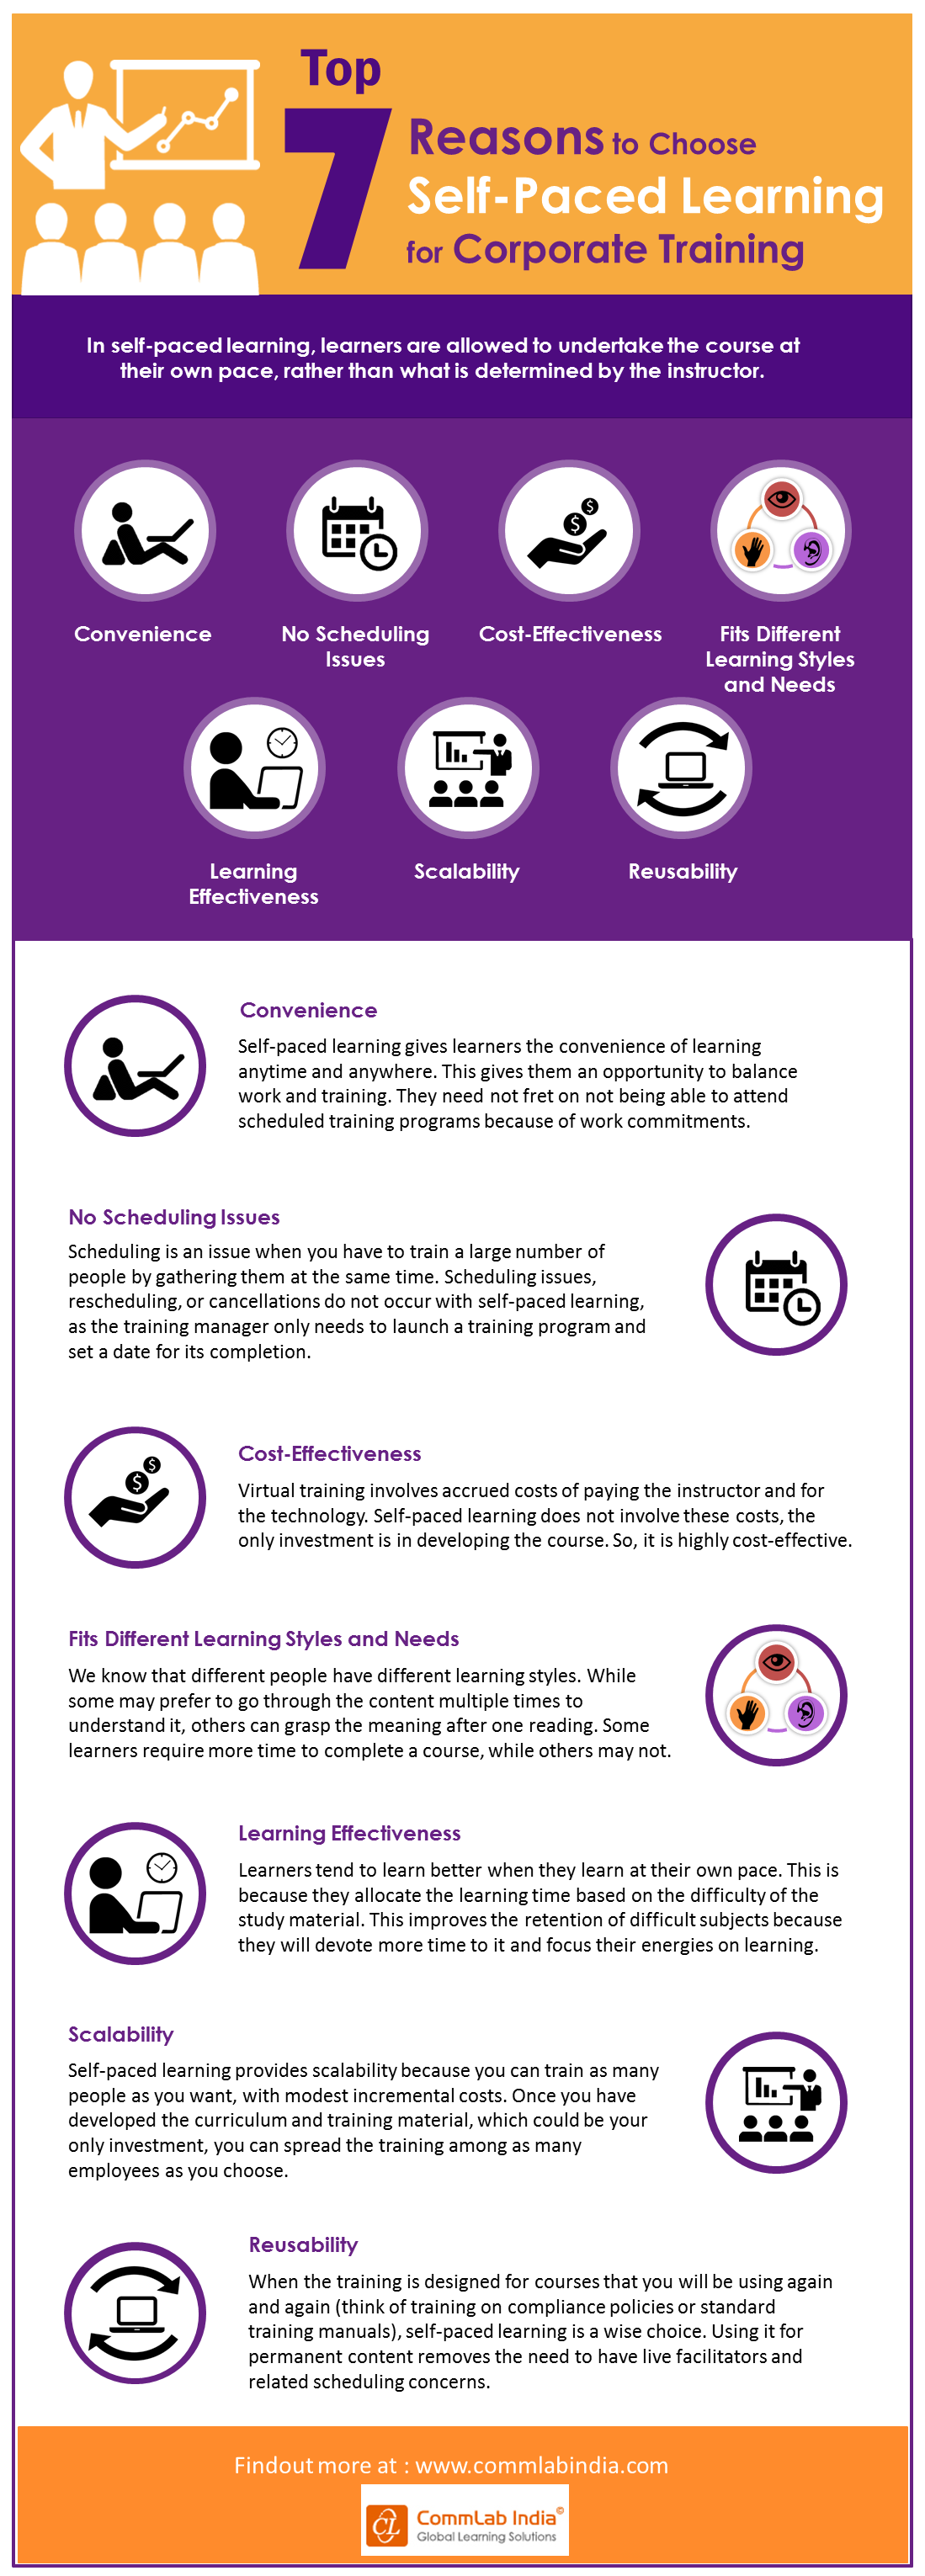 7 Top Reasons to Choose Self-paced Learning for Corporate Training [Infographic]